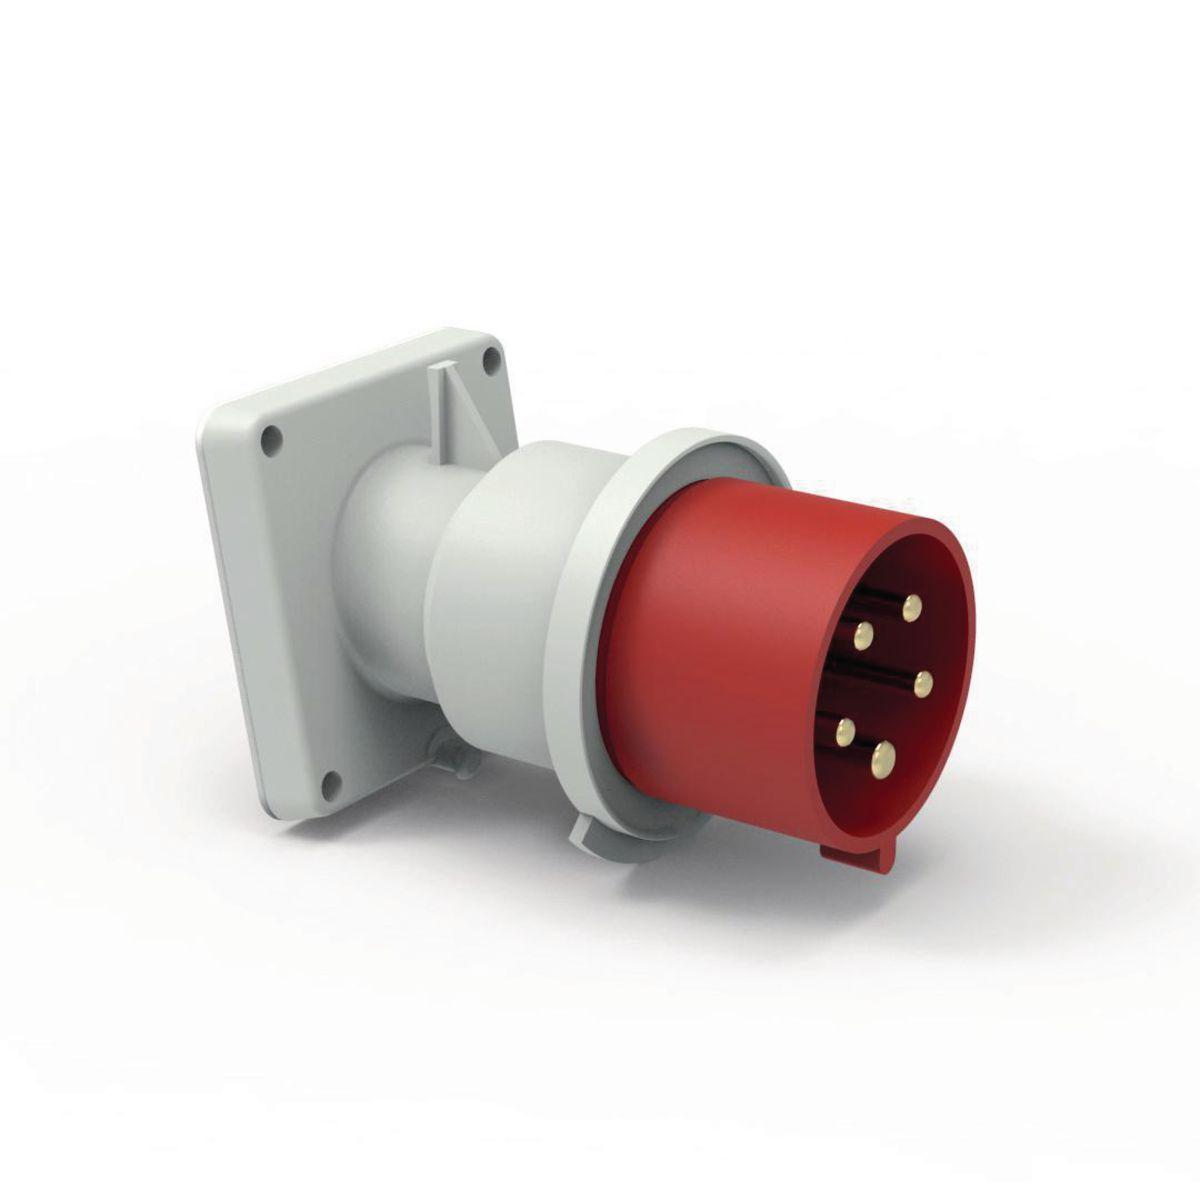 Hubbell C563B6SA Heavy Duty Products, IEC Pin and Sleeve Devices, Hubbell-PRO, Male, Inlet, 63 A  200-415 VAC, 4-POLE 5-WIRE, Red, Splash Proof  ; IP44 environmental ratings ; Impact and corrosion resistant insulated non-metallic housing ; Sequential contact engagement to